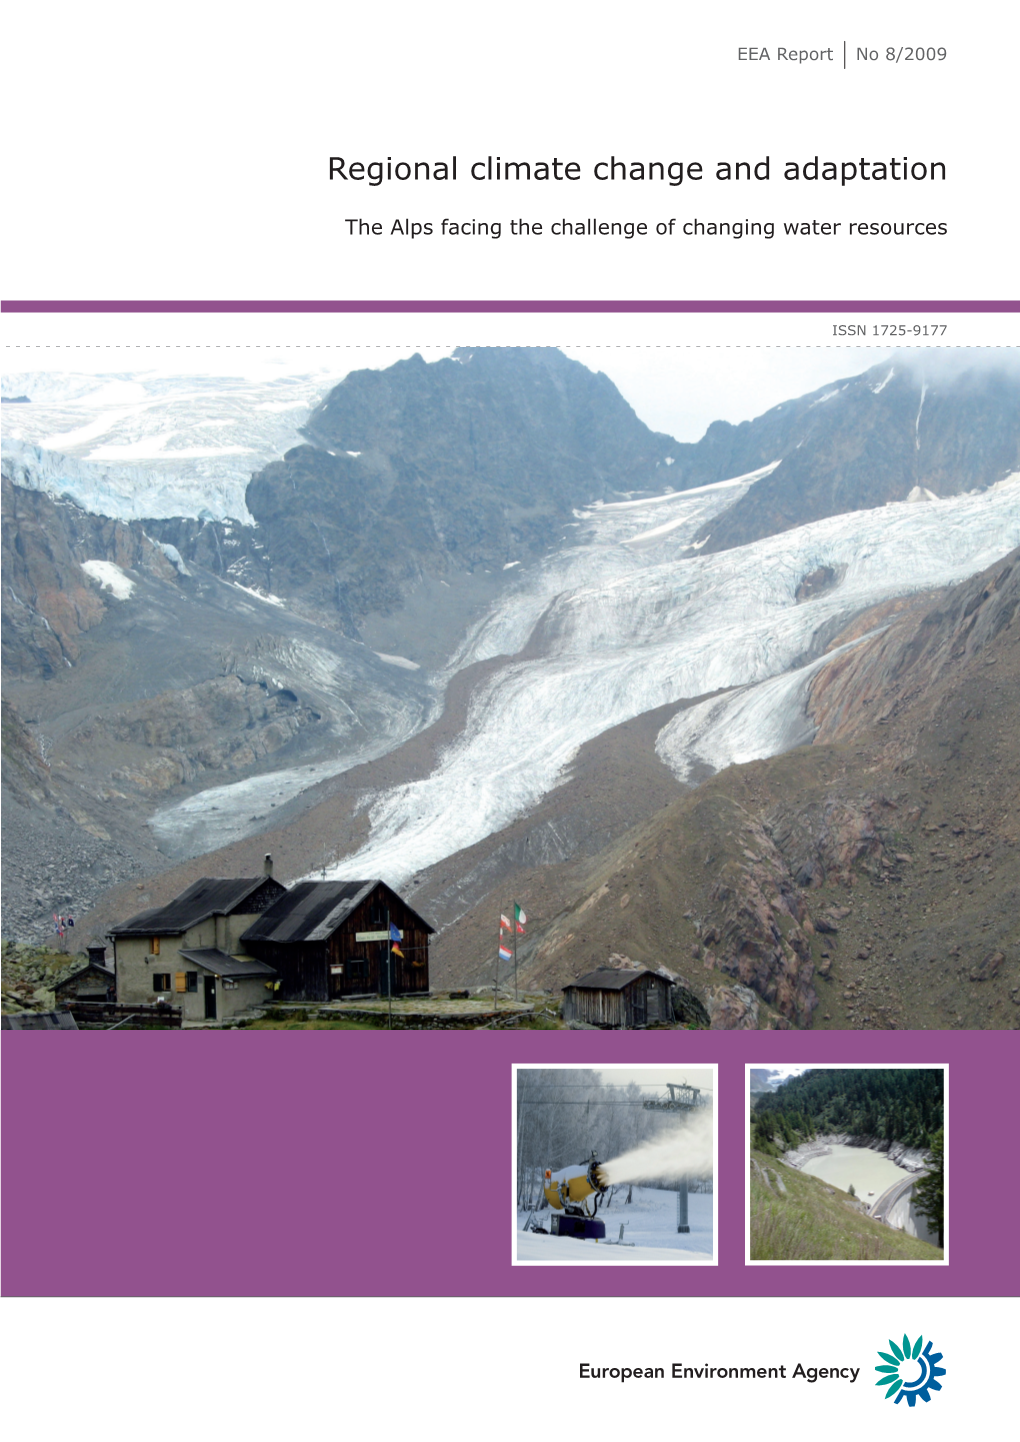 Regional Climate Change and Adaptation — the Alps Facing The